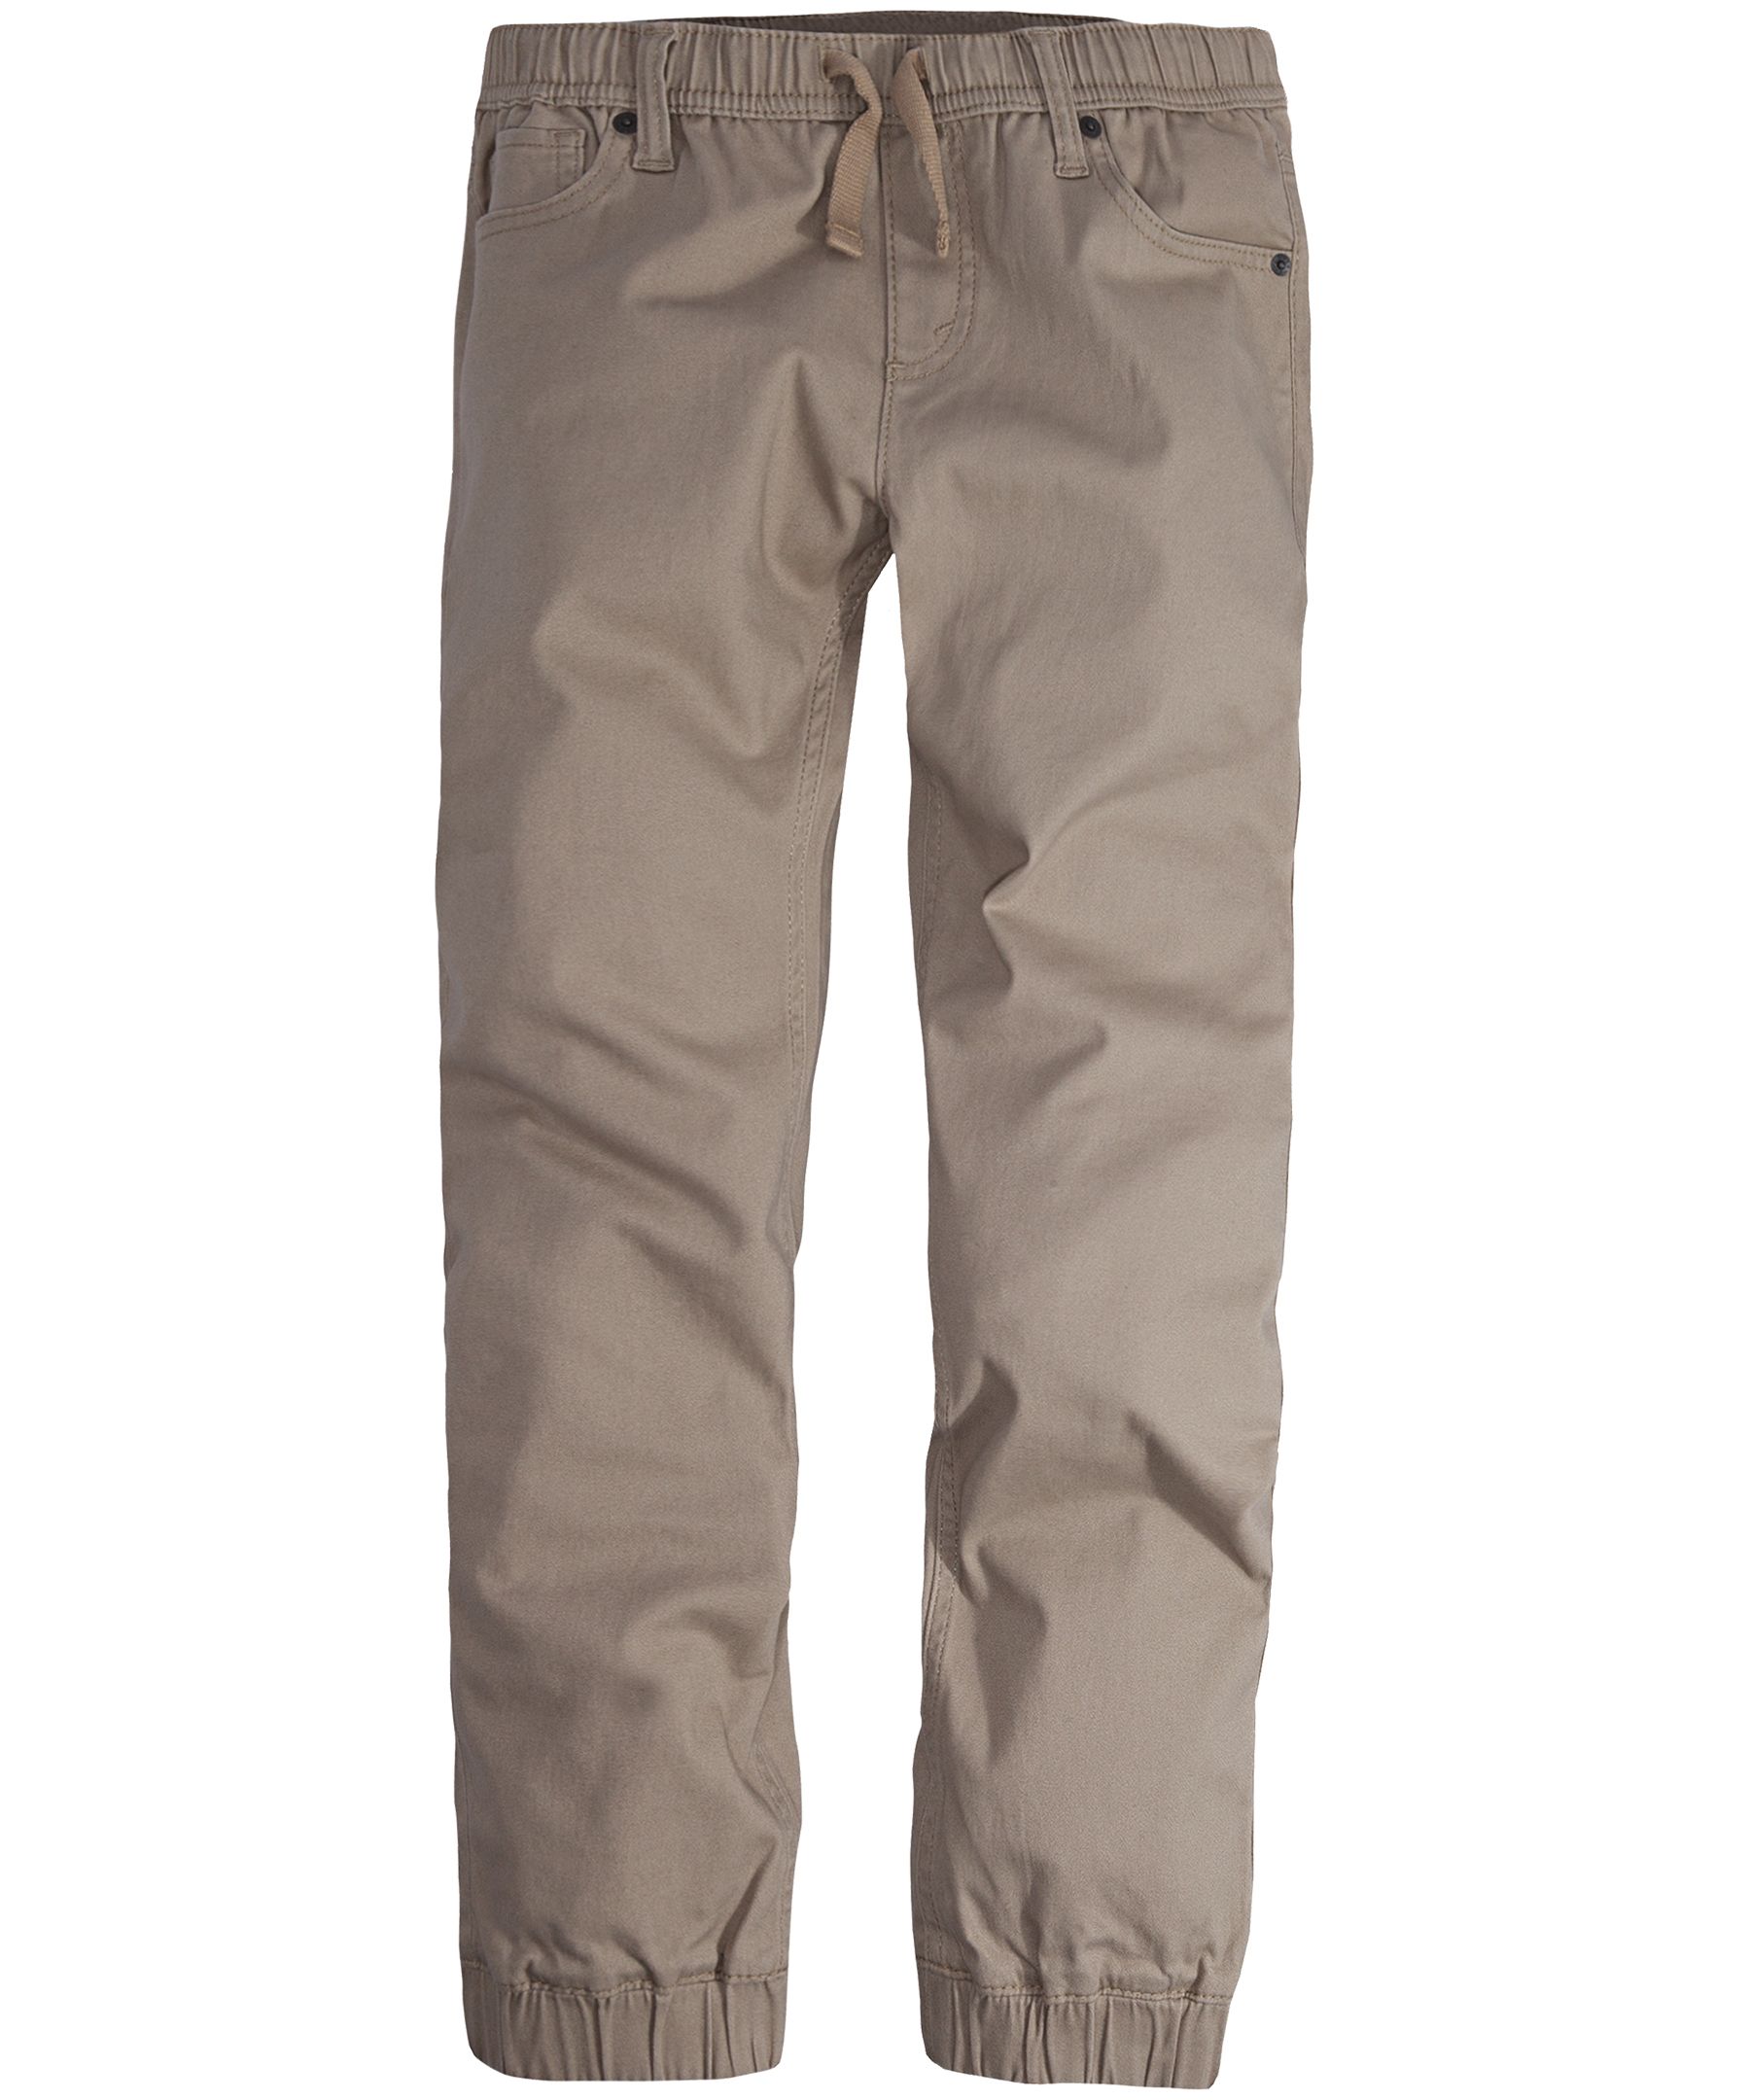 Levi's Boys' 7-16 Years Stretch Twill Chino Joggers - Beige